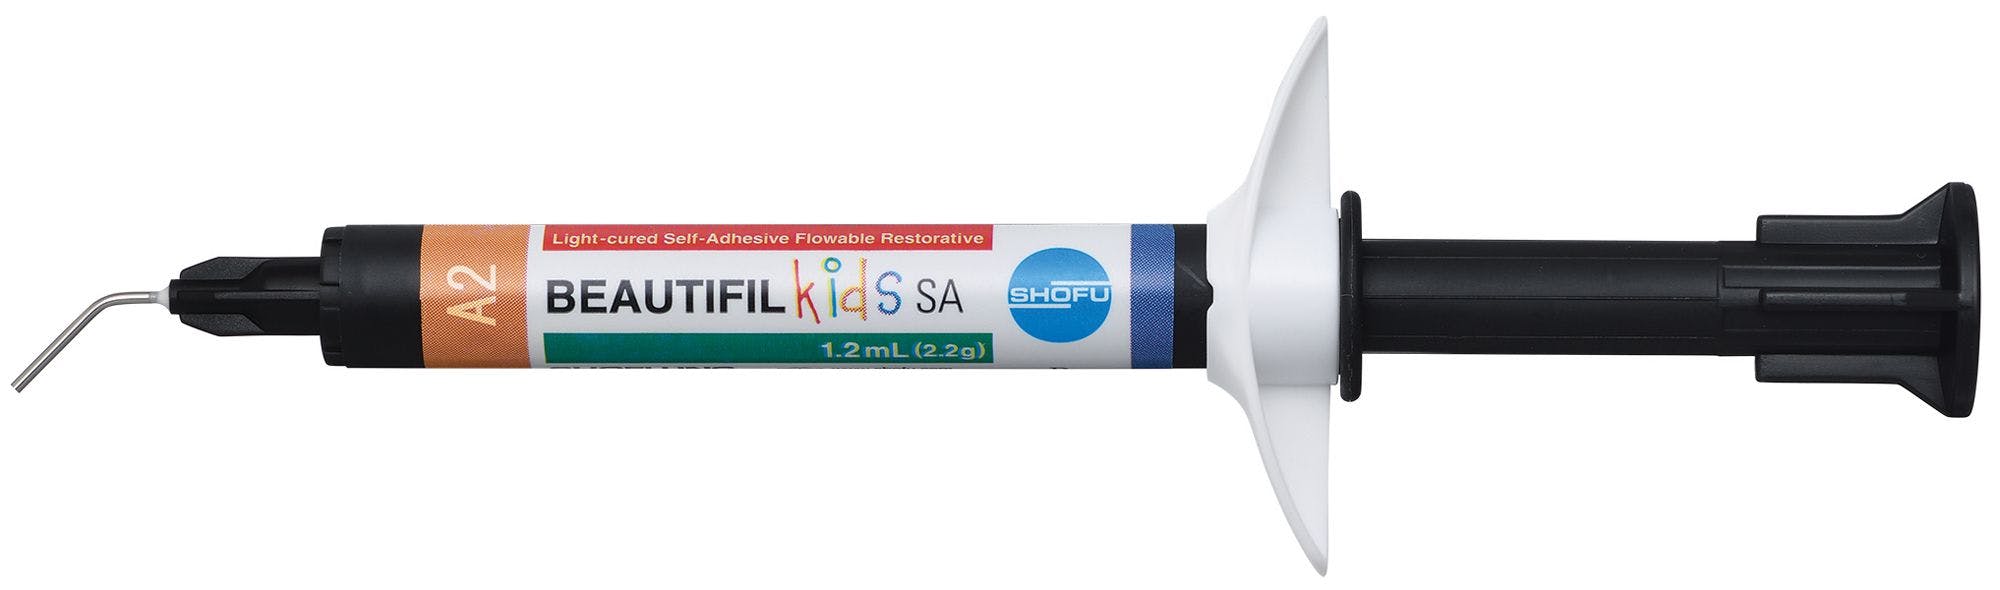 Shofu Dental to Introduce Pediatric Flowable Composite at Chicago Midwinter Meeting